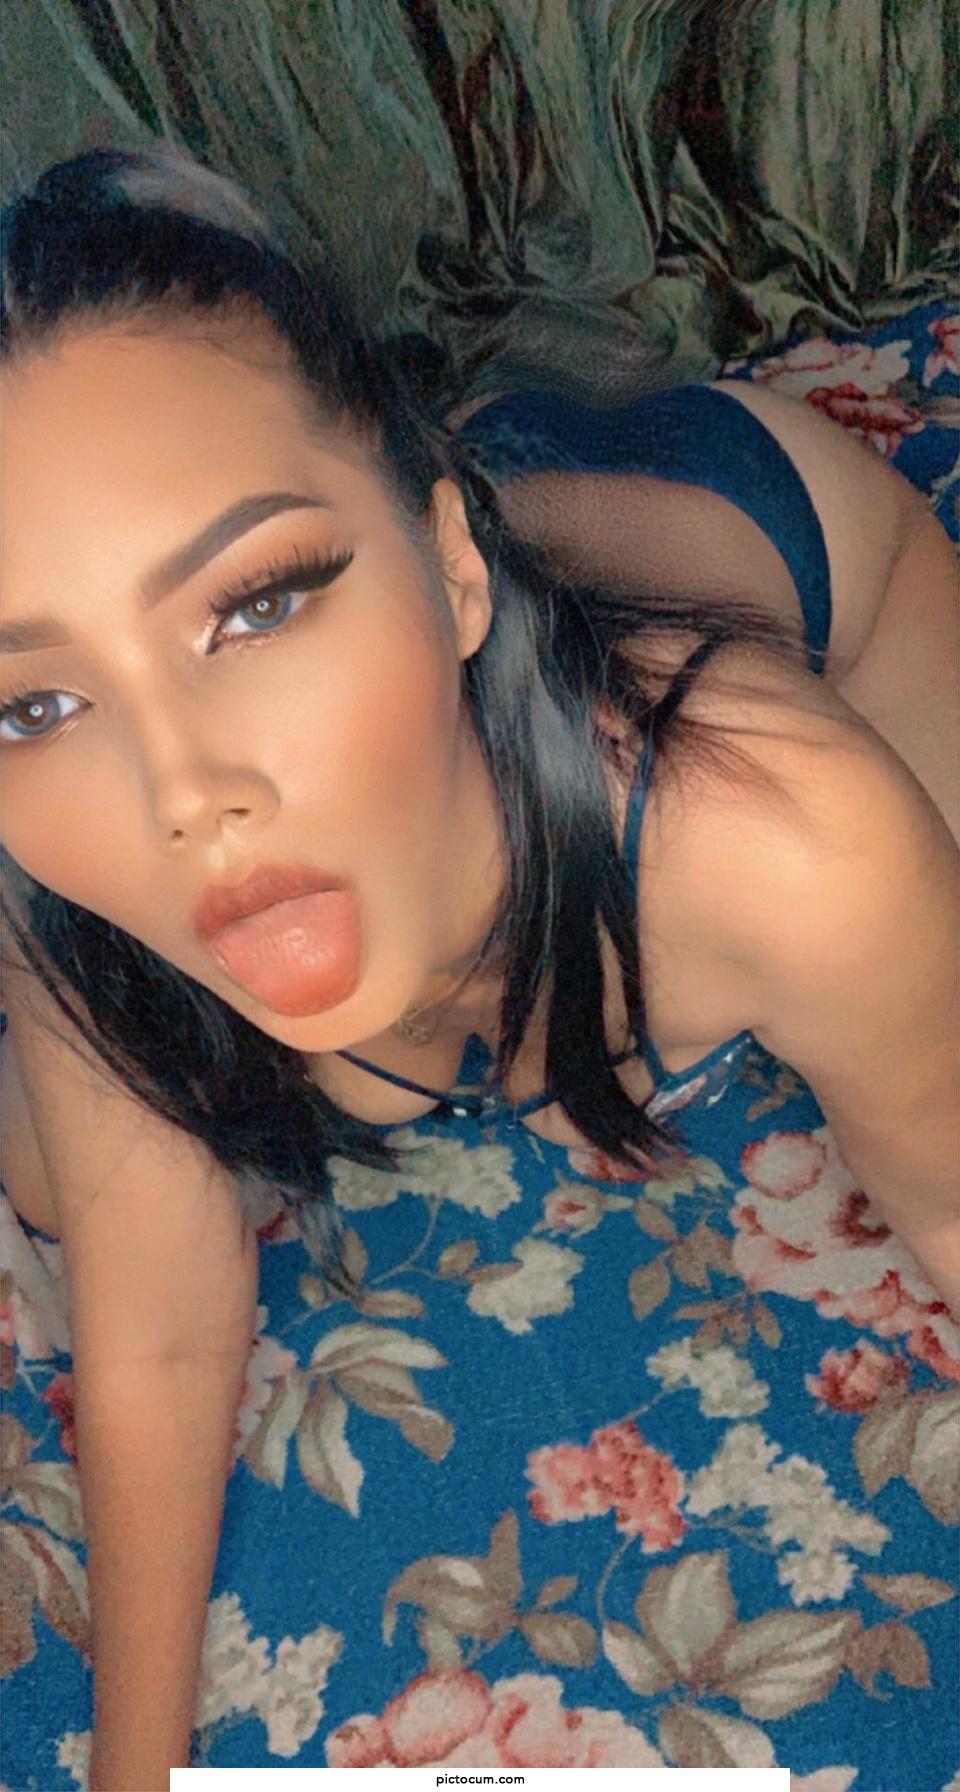 I am waiting for you to cum in my face